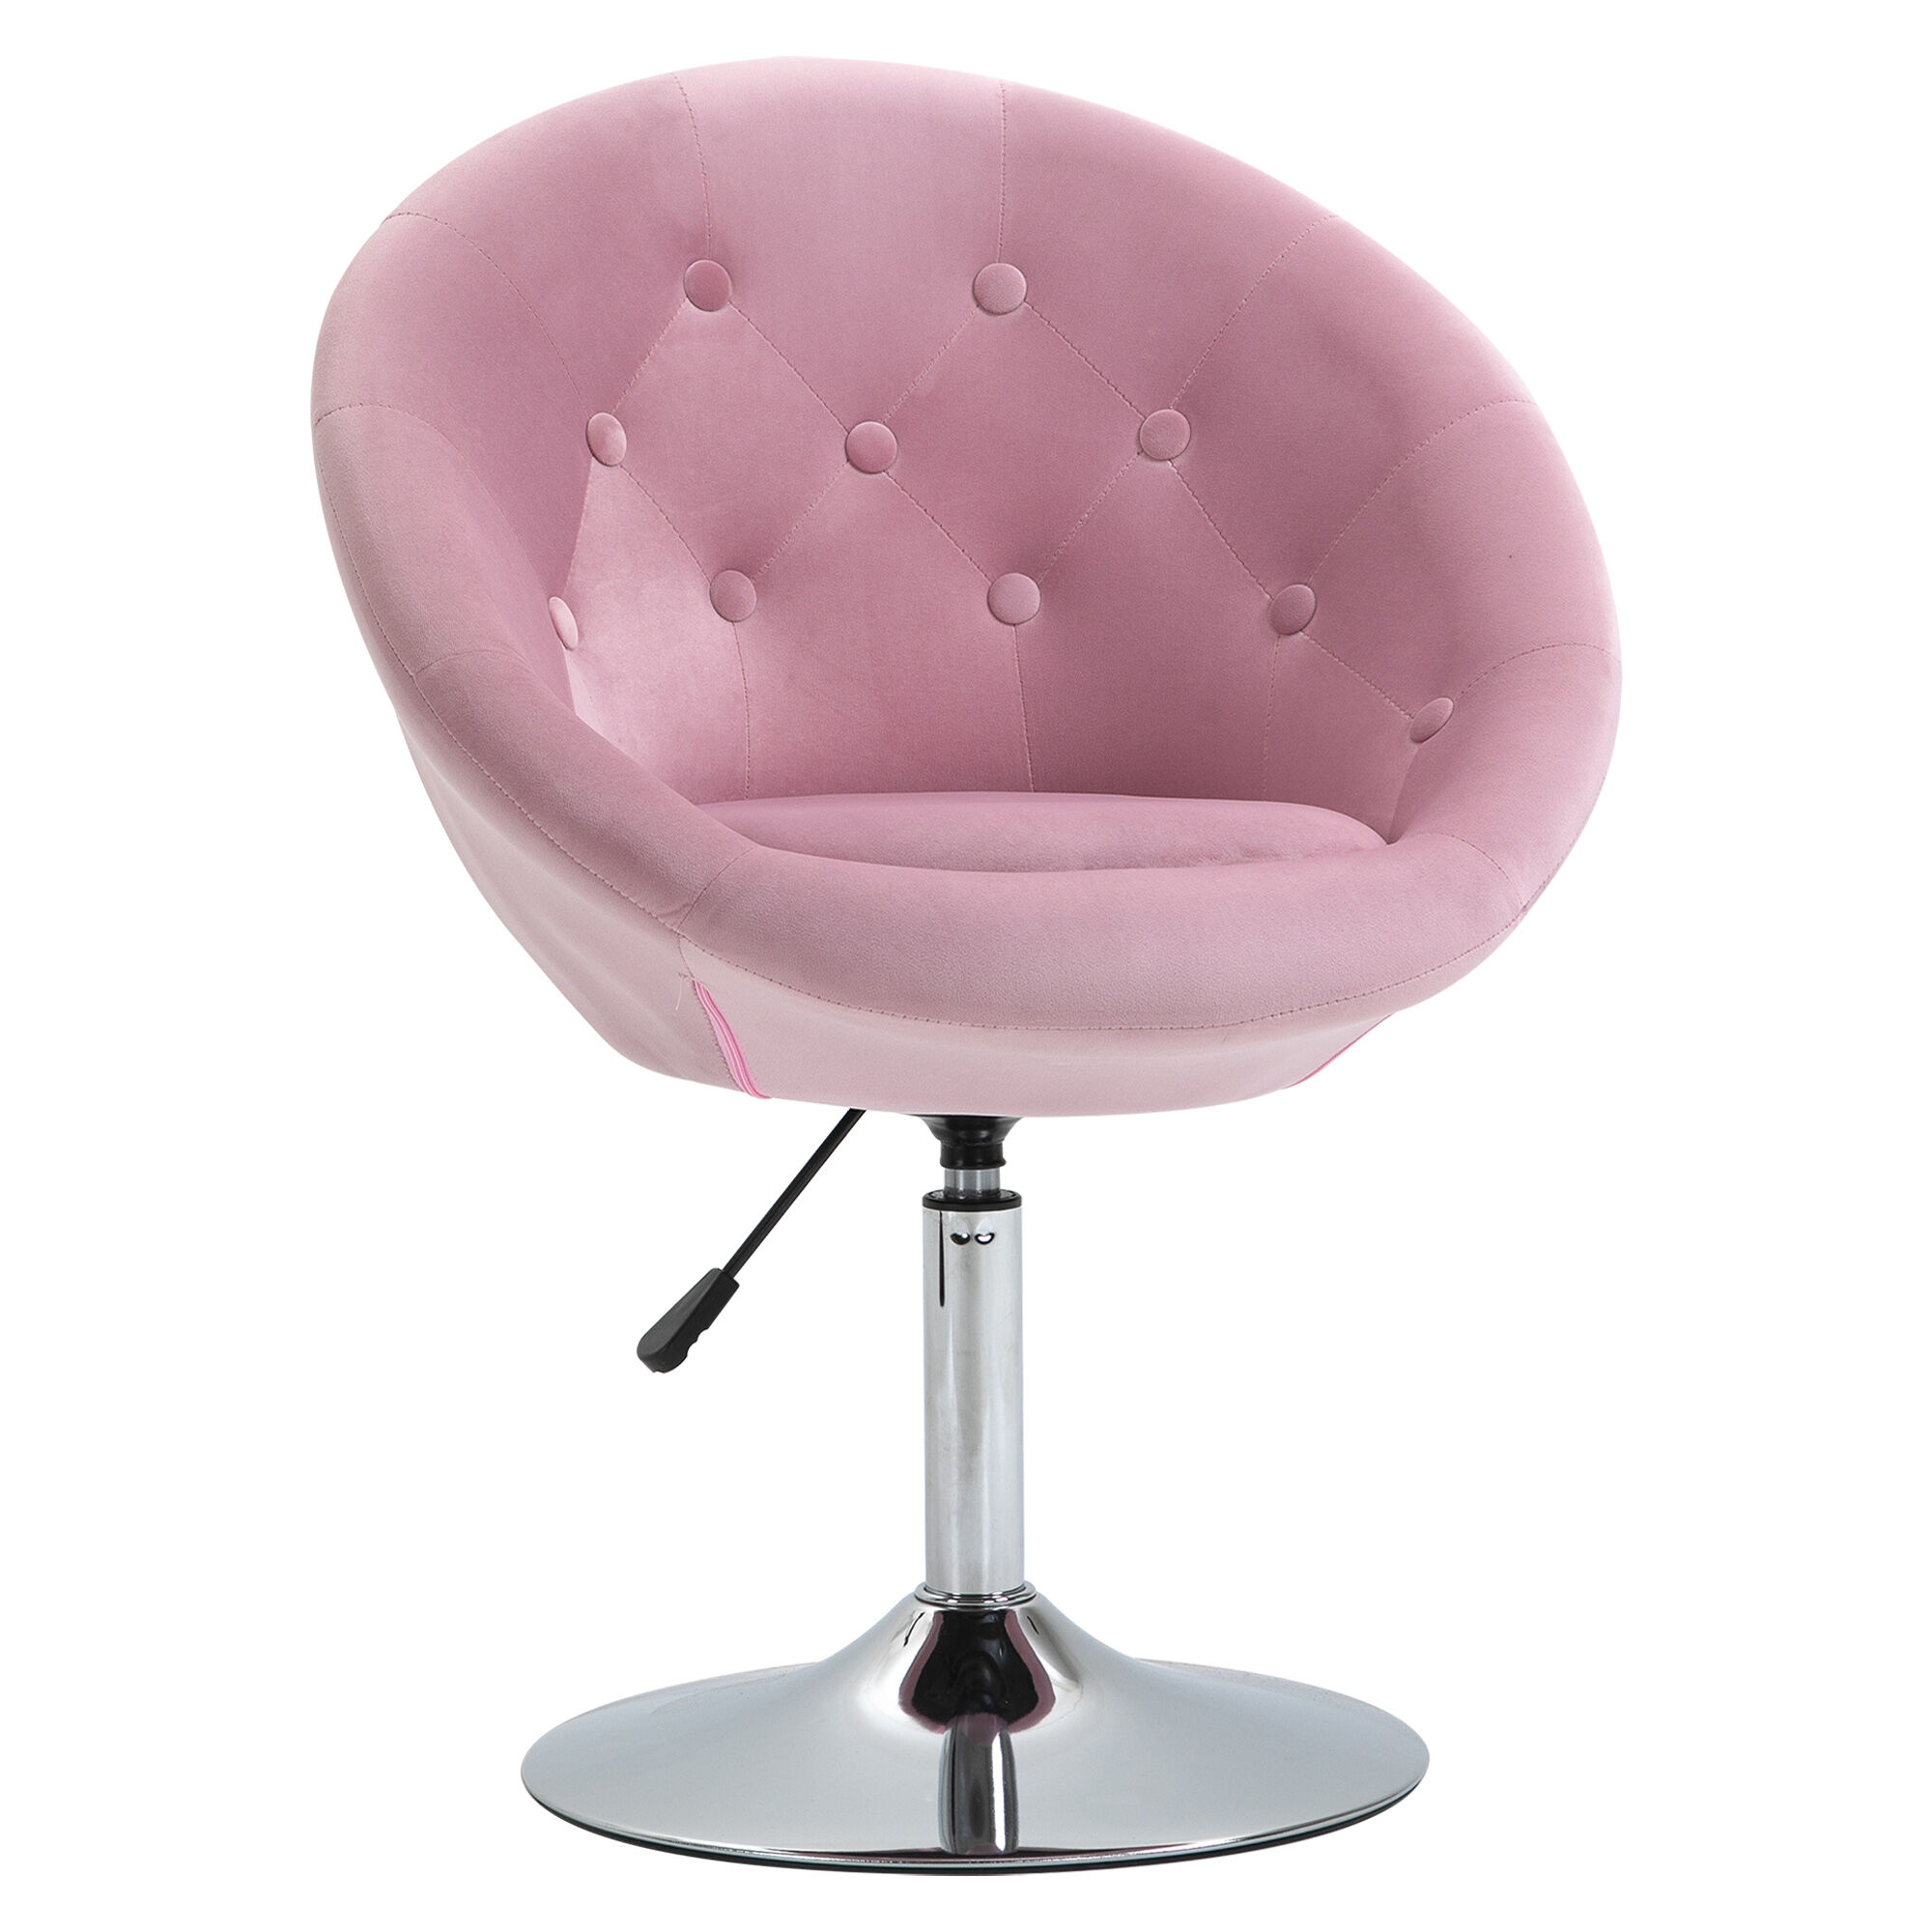 HOMCOM Modern Makeup Vanity Chair Round Tufted Swivel Accent Chair with Chrome Frame Height Adjustable for Living Room, Bedroom, Pink